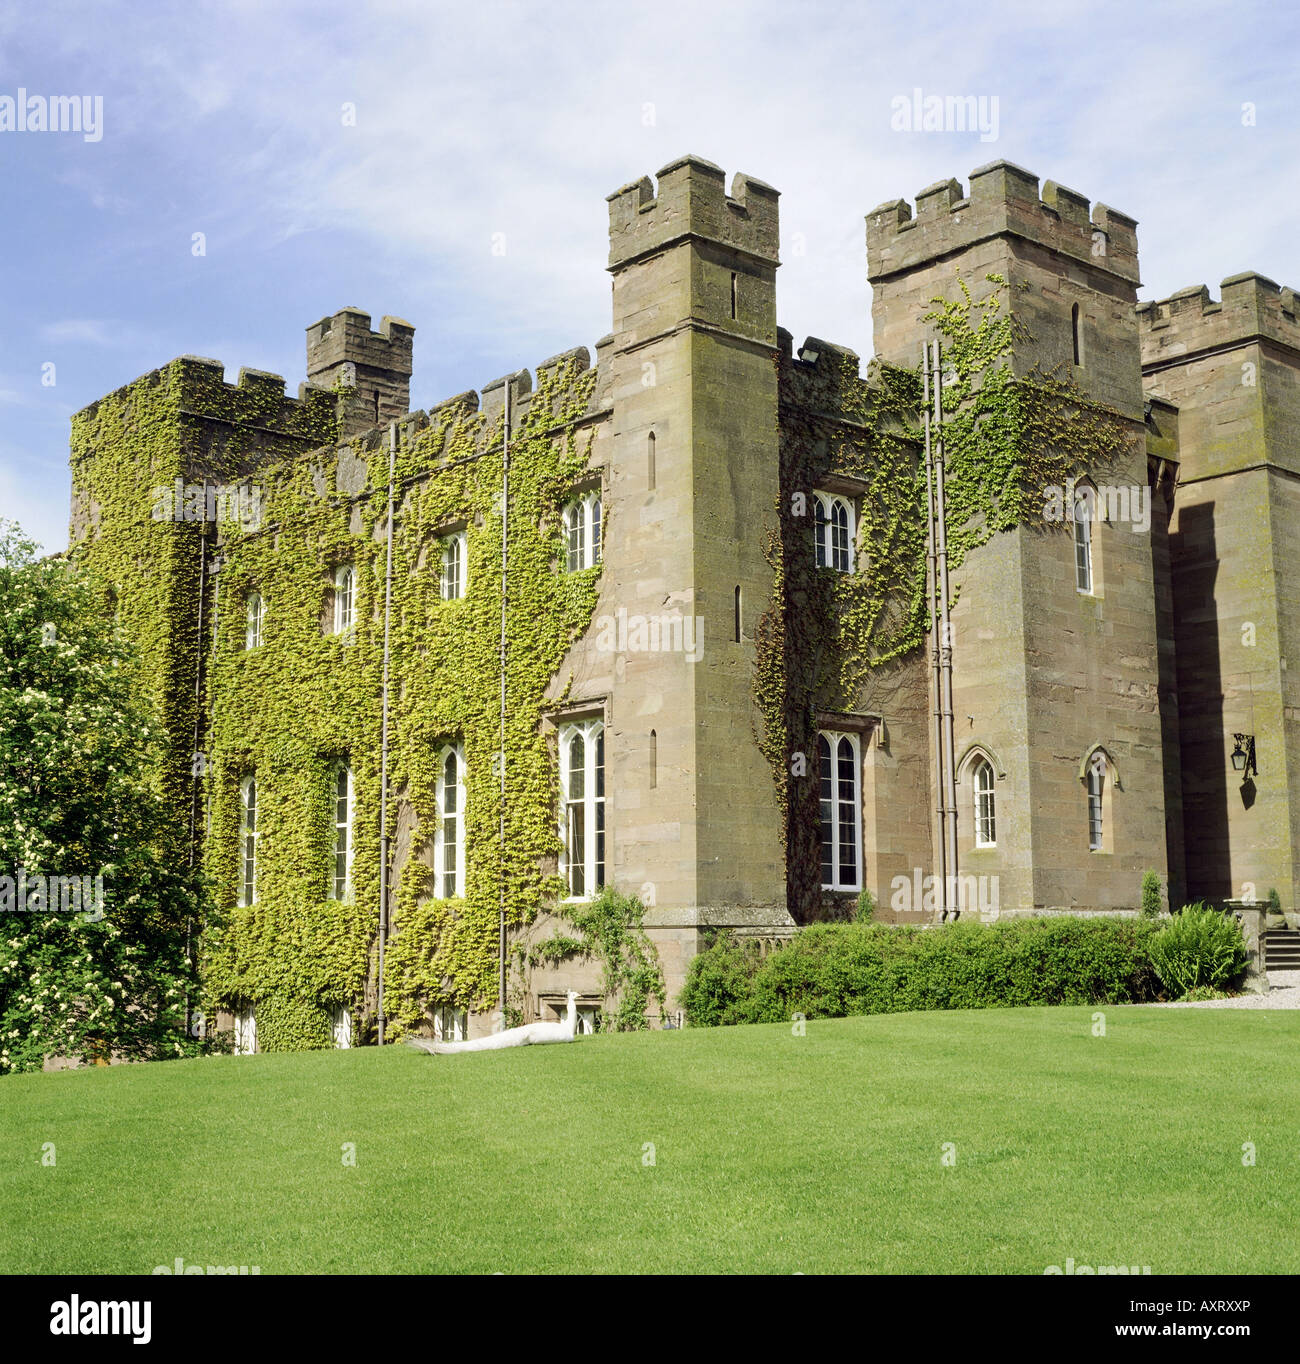 geography / travel, Great Britain / United Kingdom, Scotland, castles, Scone Palace, exterior view, castle, ivy, Stock Photo